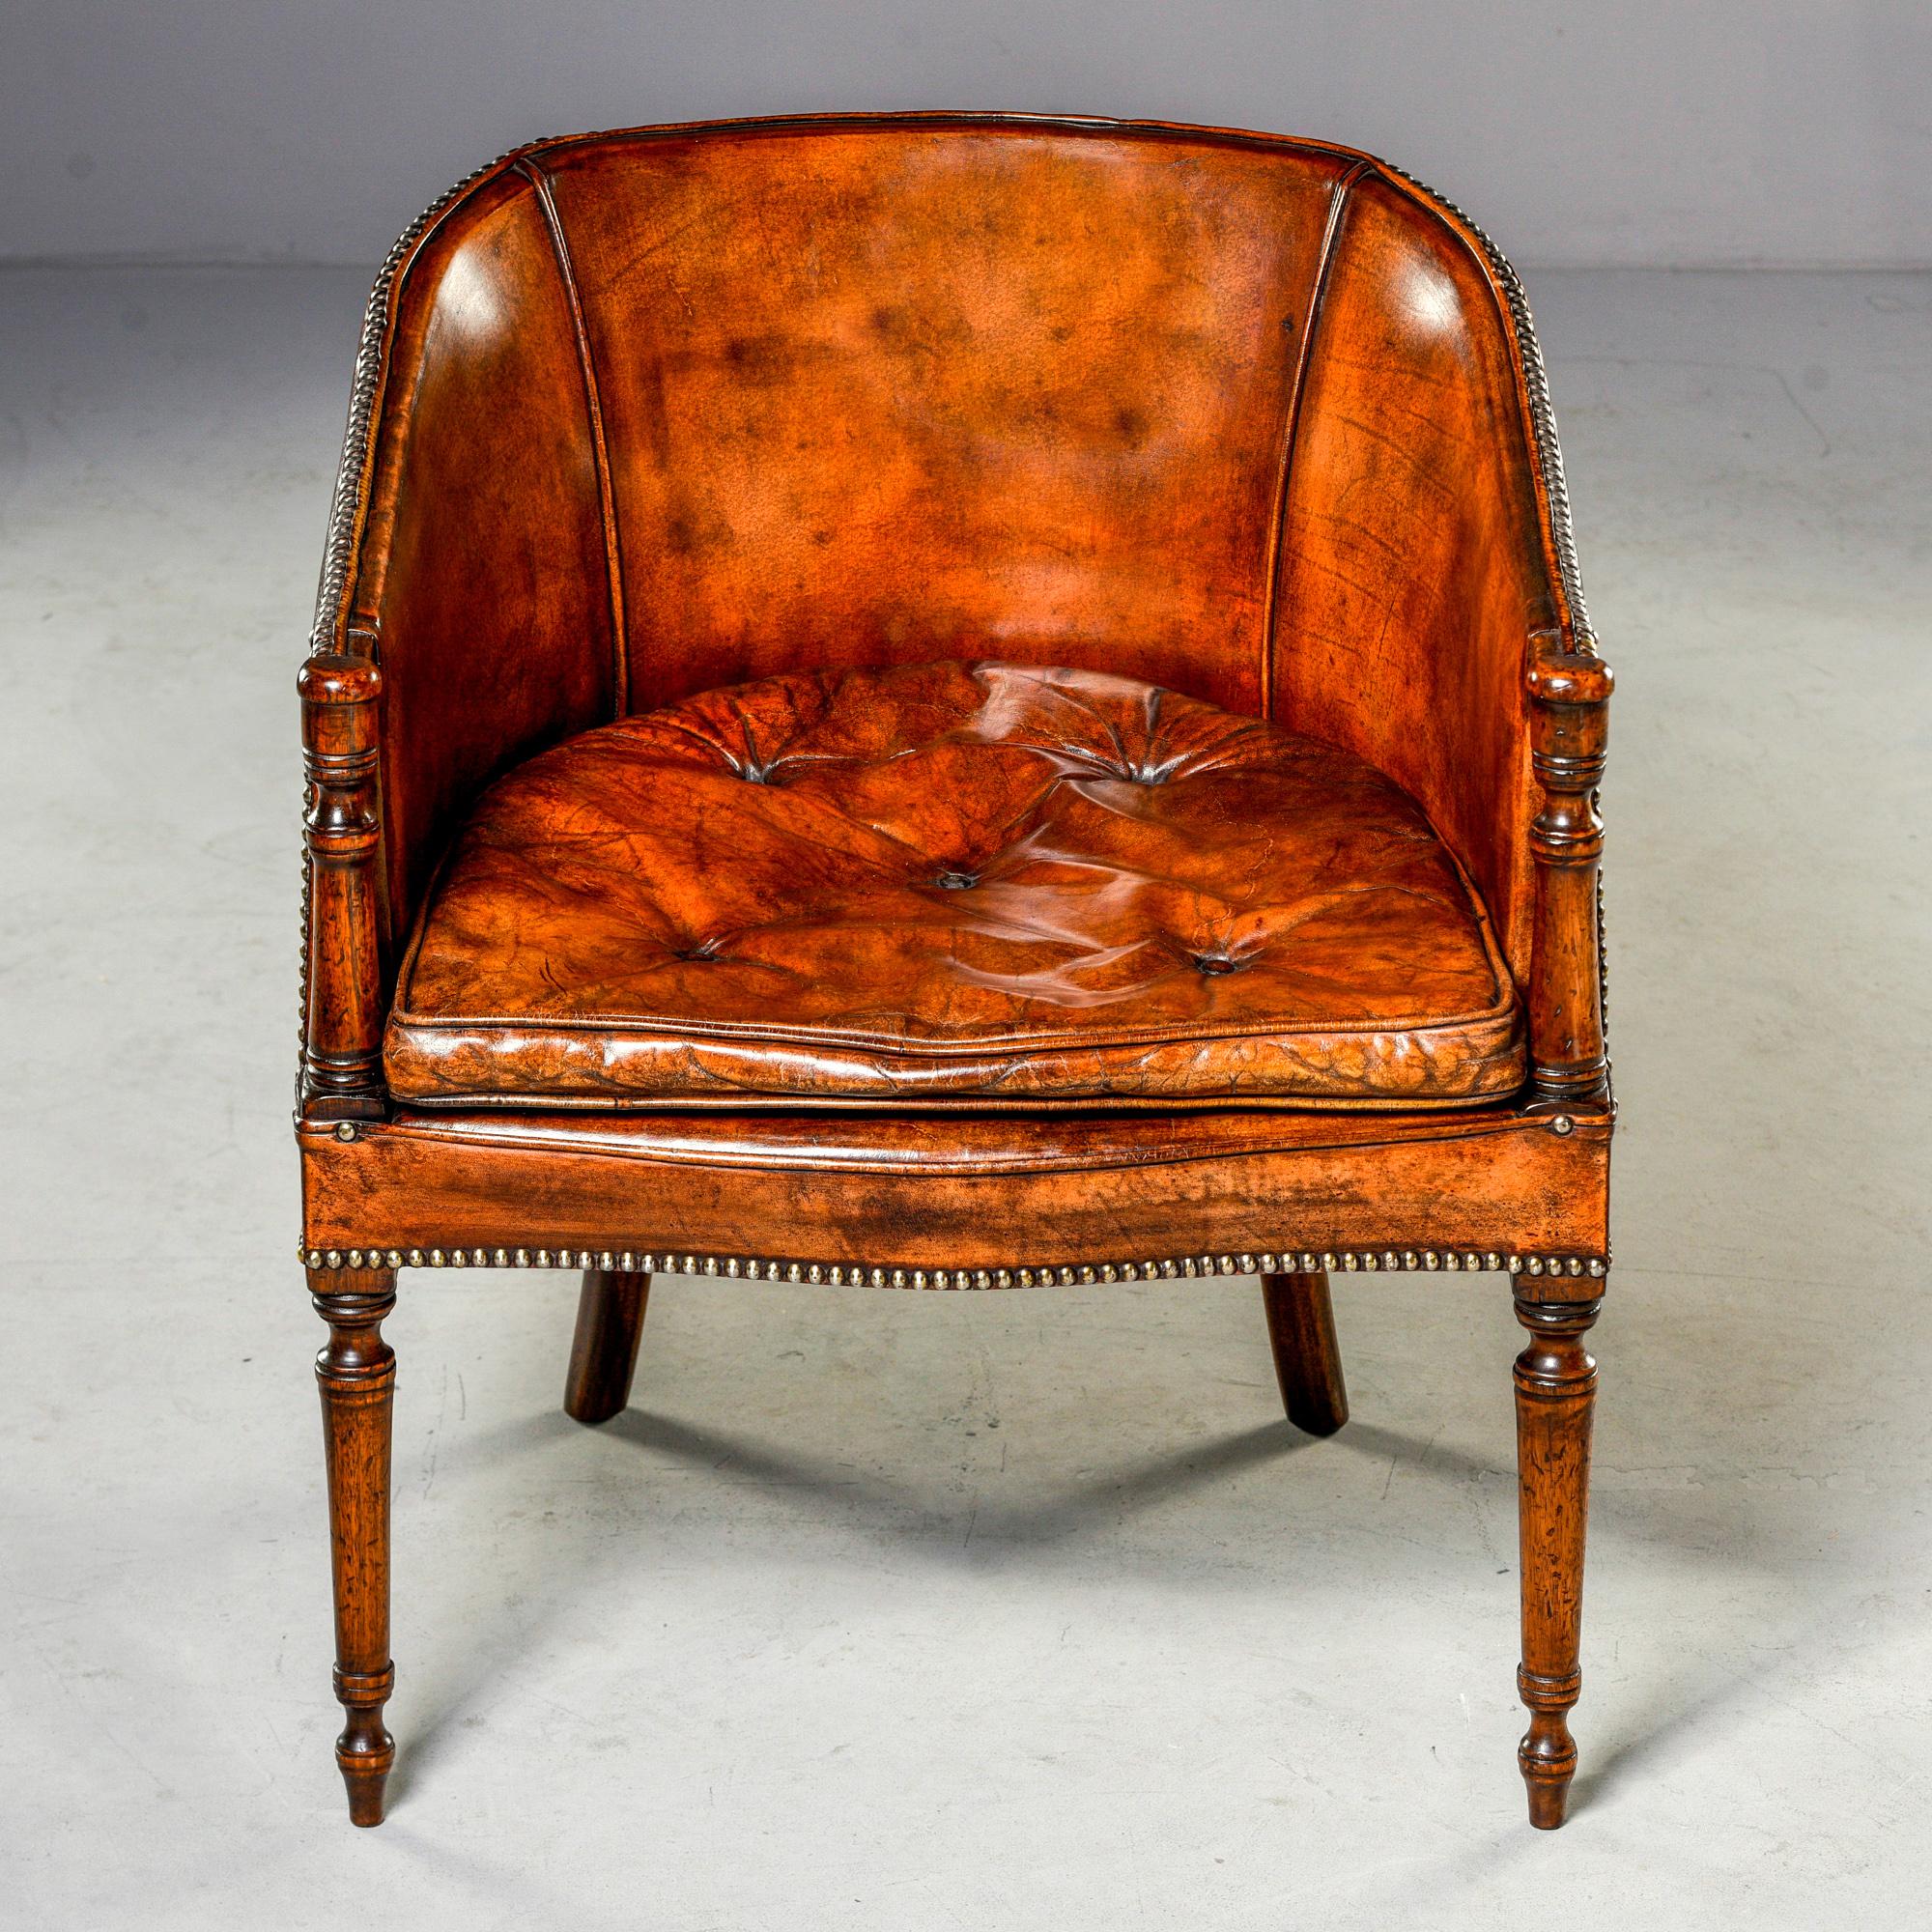 Leather and mahogany barrel back chair, circa 1930s. Original leather upholstery with removable tufted seat cushion, brass head upholstery nails. Mahogany frame features turned front legs and arm supports. Unknown maker. Leather shows wear/age but